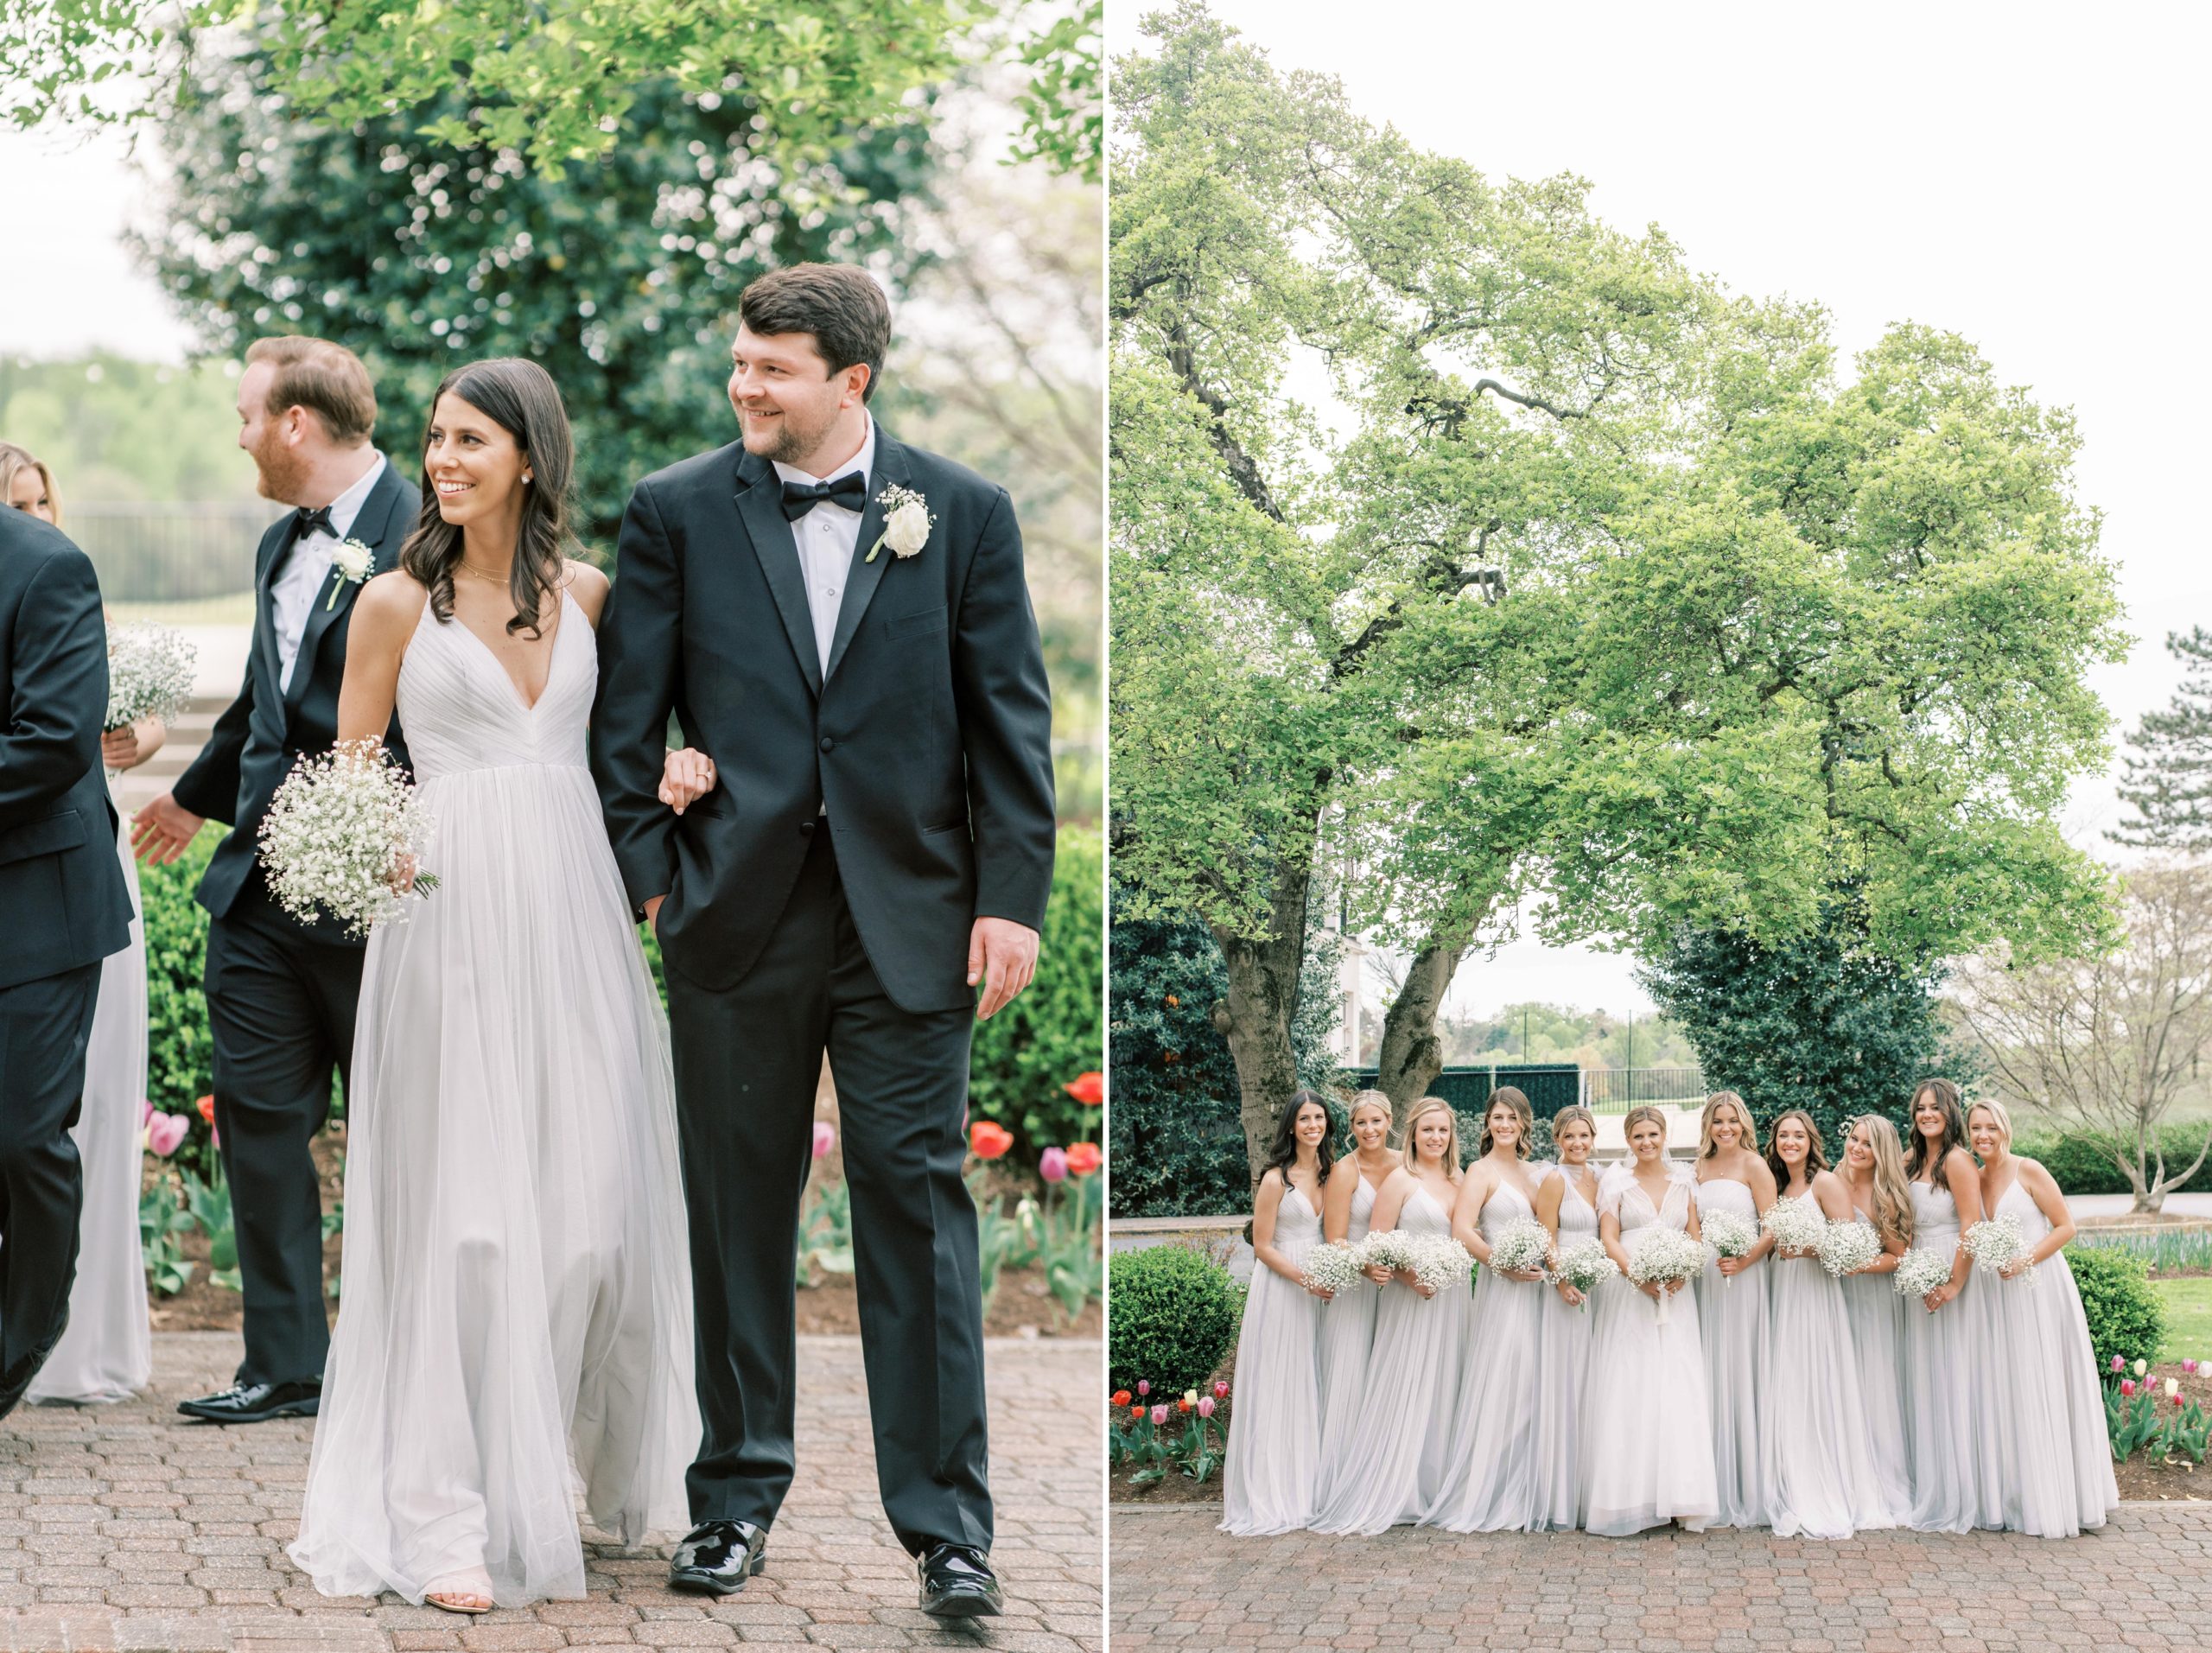 An elegant, black-tie wedding at the Congressional Country Club outside of Washington, DC featuring photography by Alicia Lacey.